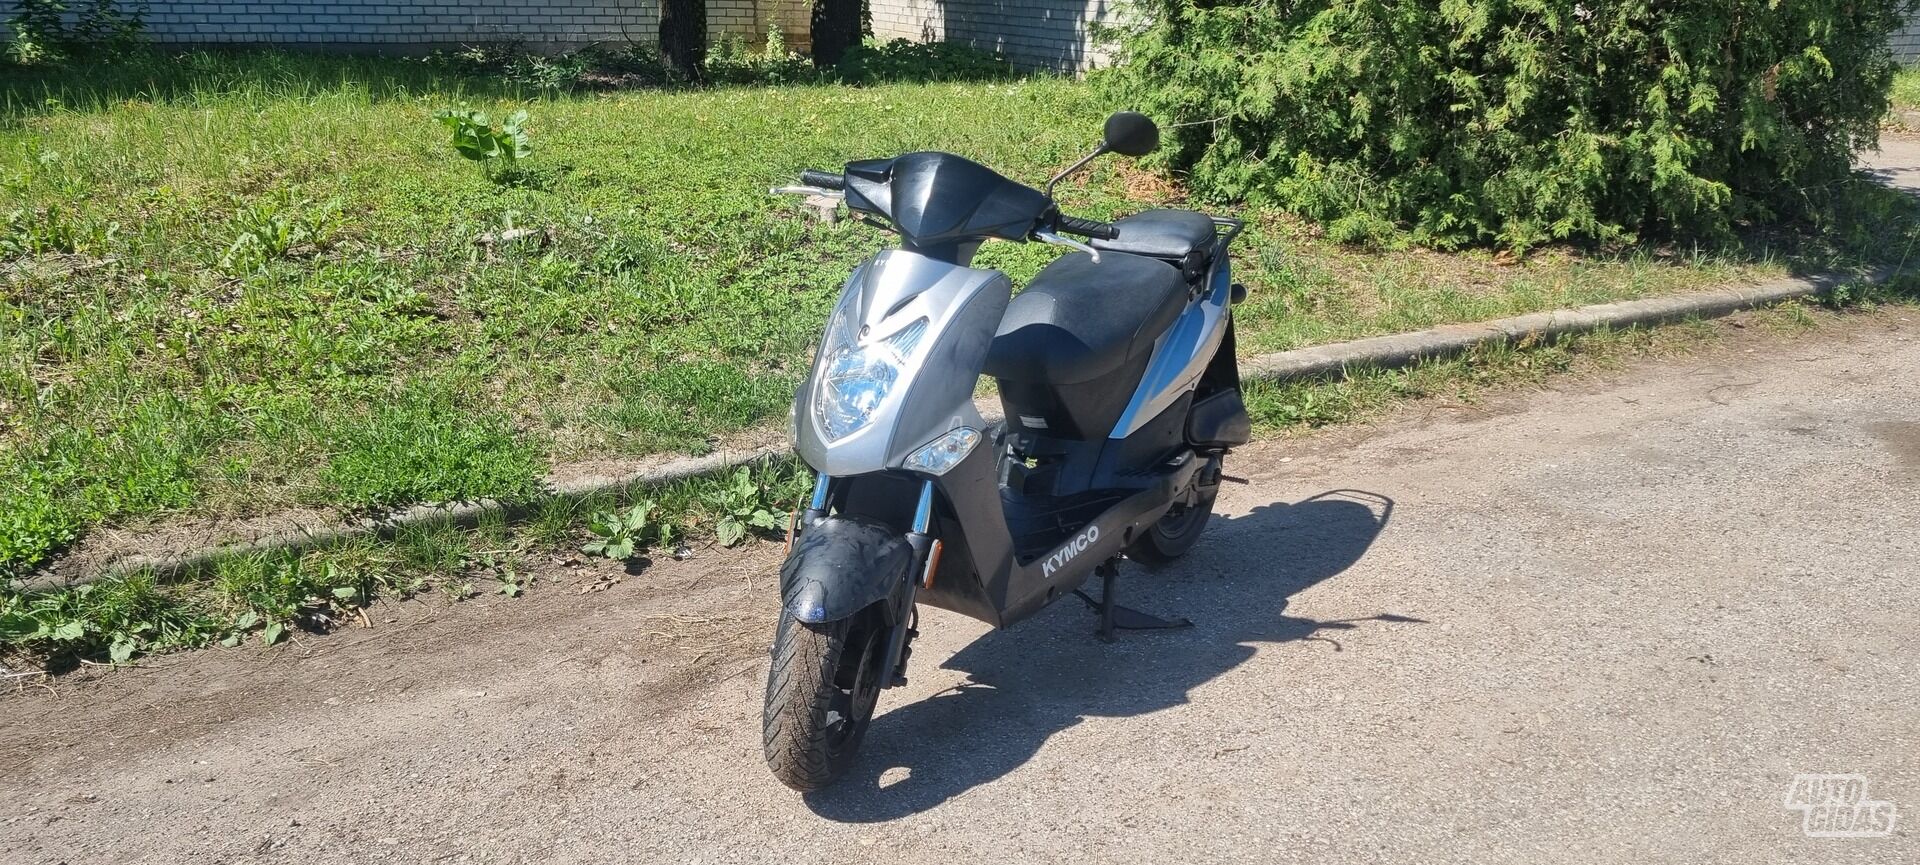 Kymco AGILITY 50 2012 y Scooter / moped